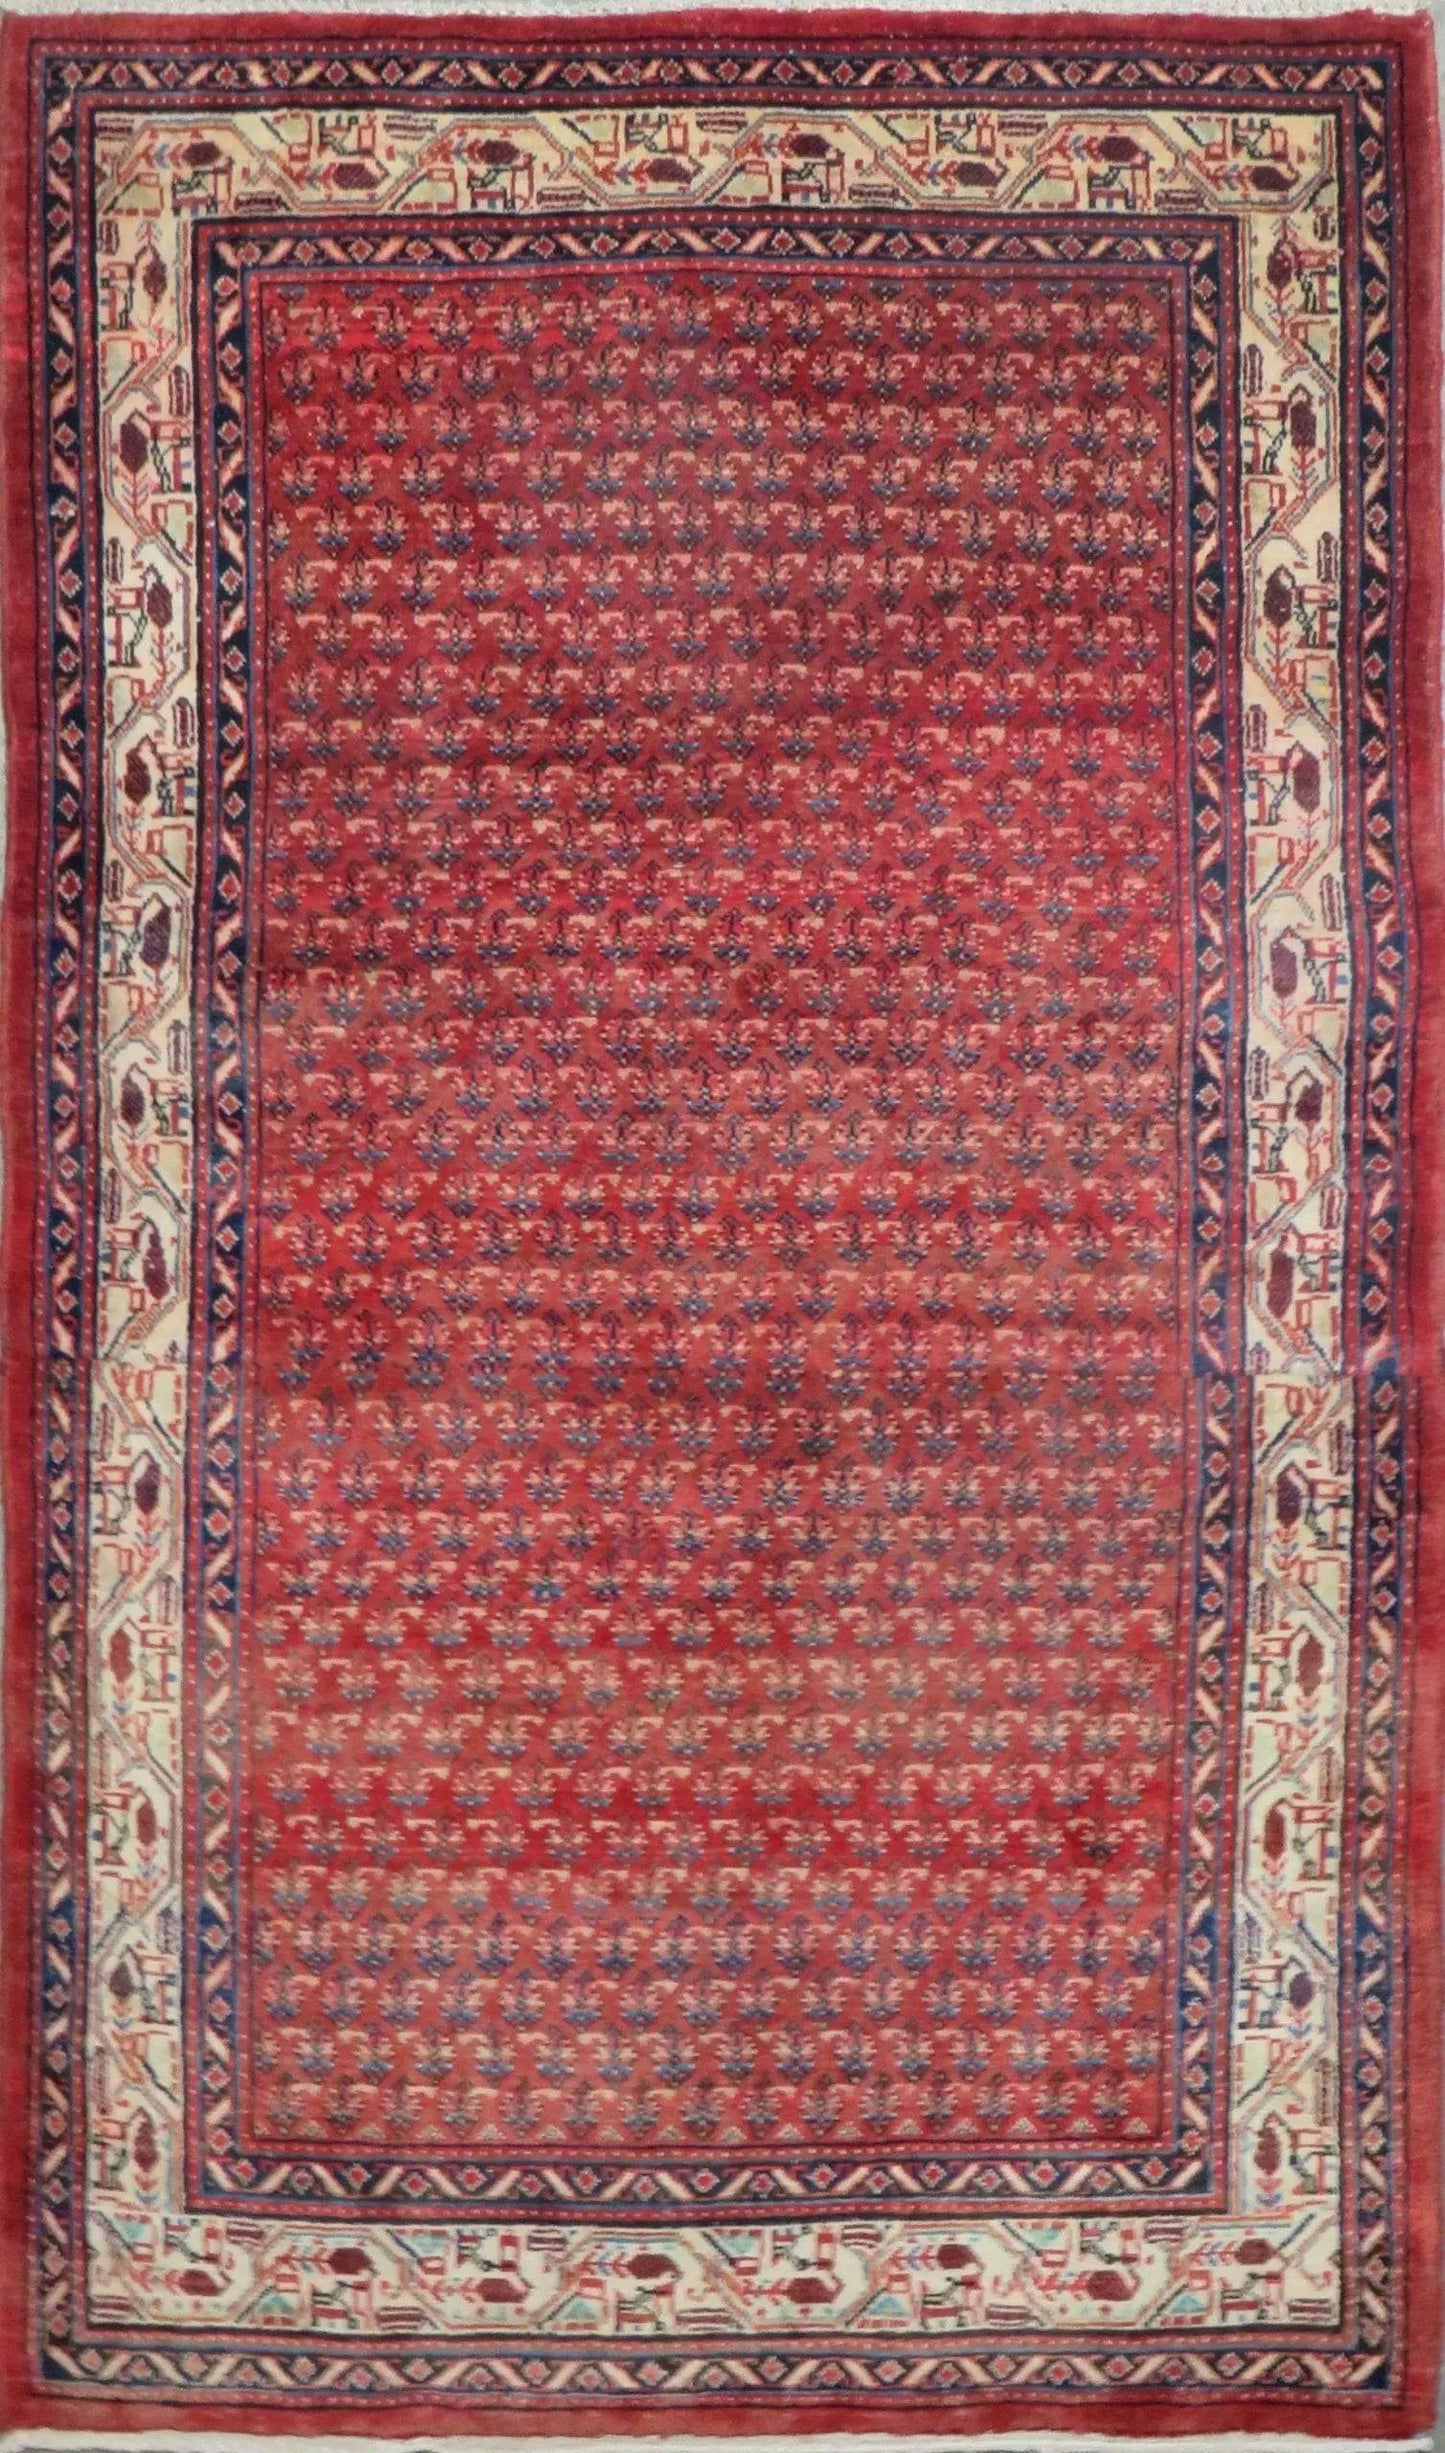 Hand-Knotted Persian Wool Rug _ Luxurious Vintage Design, 7'4" x 4'6", Artisan Crafted